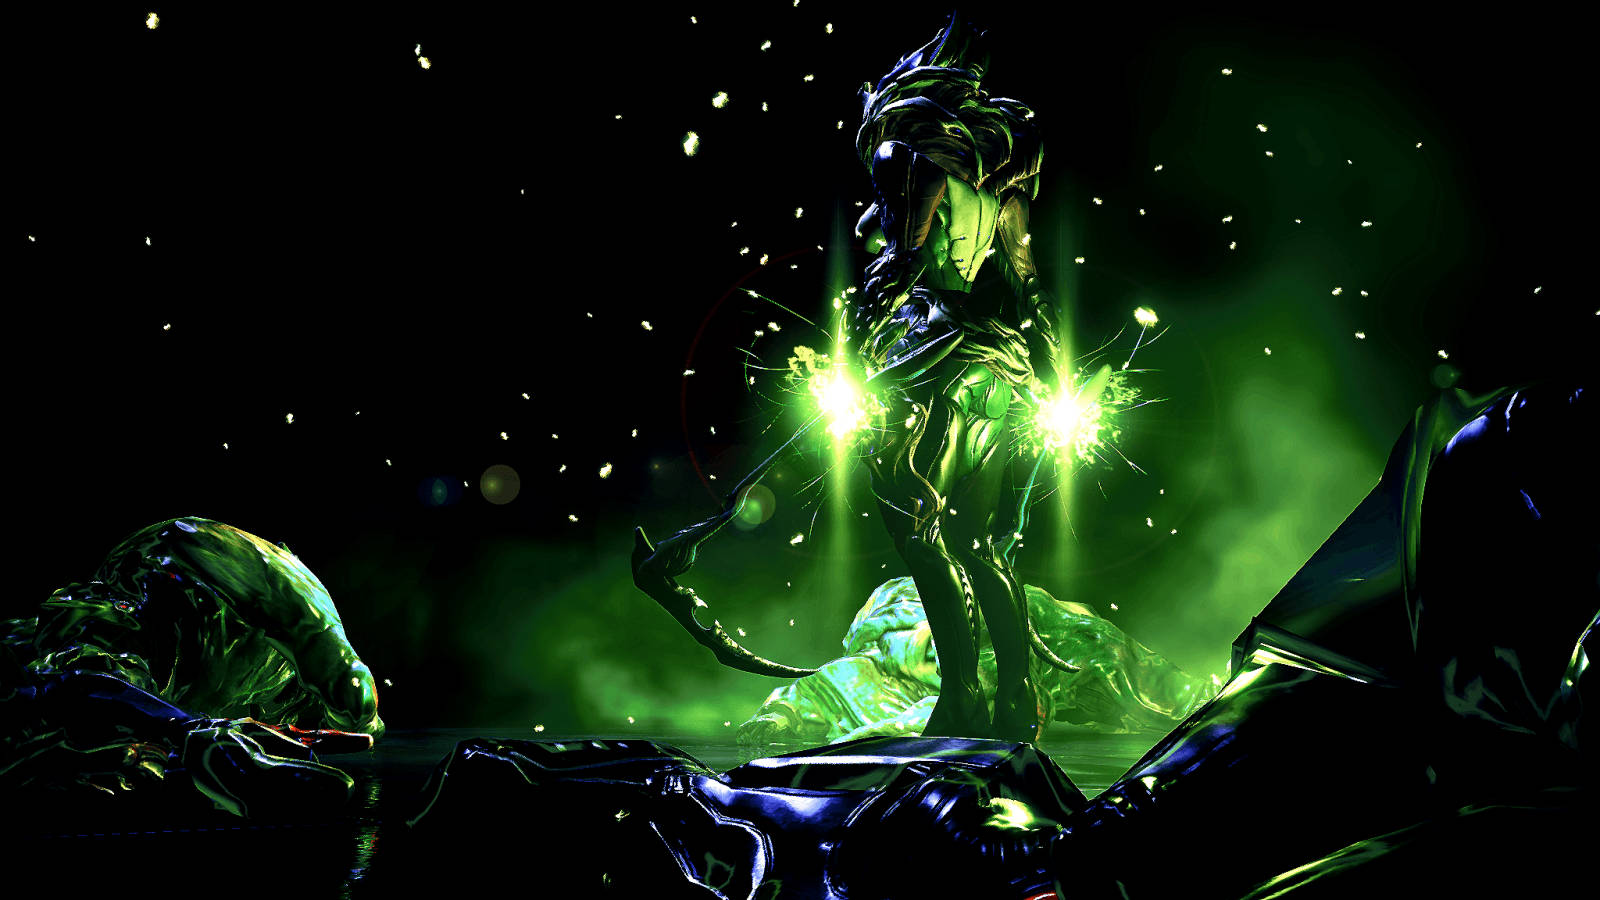 Warframe Tenno ancient soldier with pickaxe weapon and hands glowing green wallpaper. 